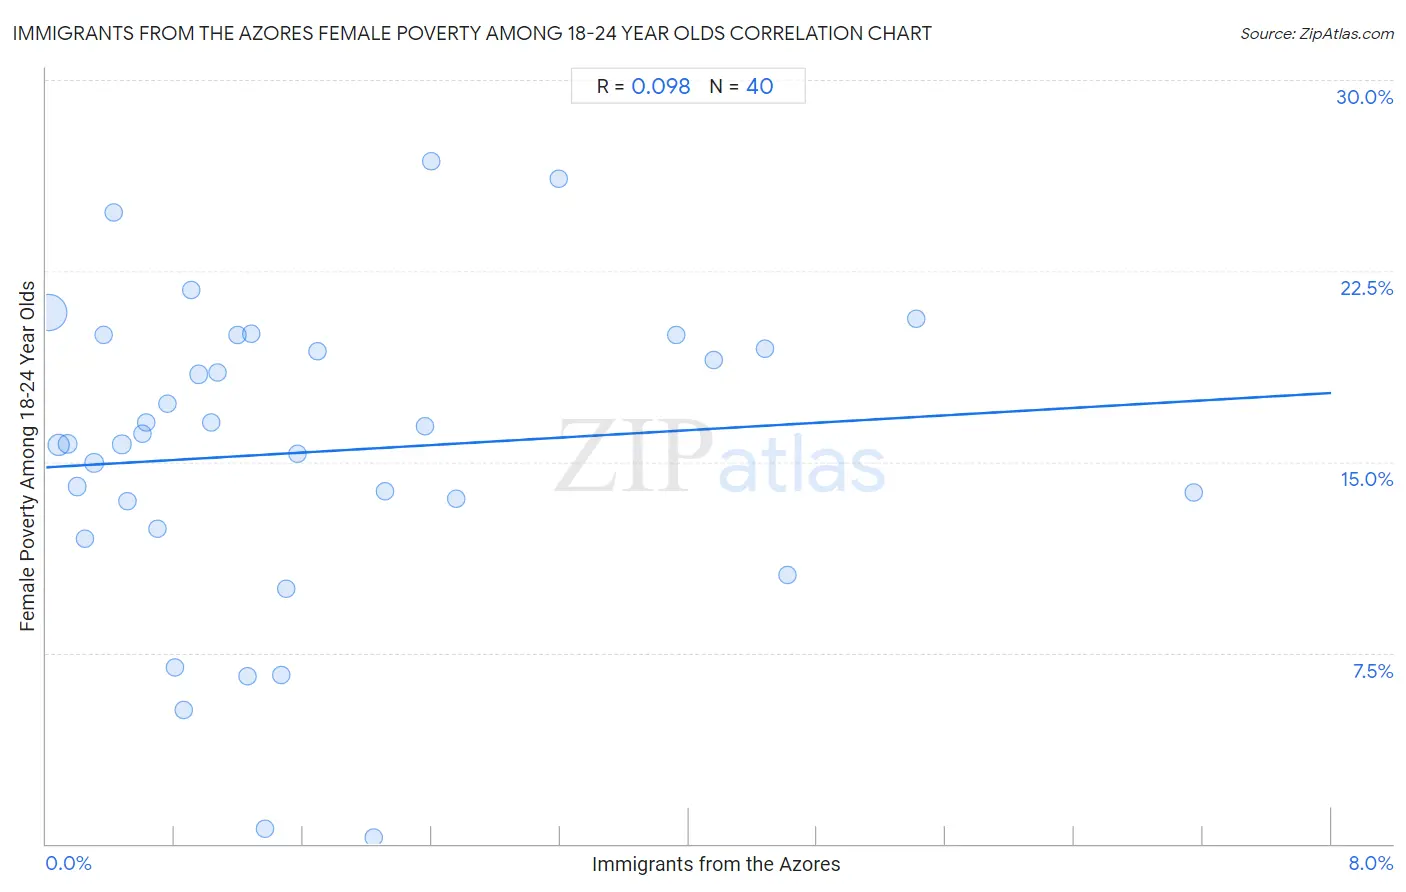 Immigrants from the Azores Female Poverty Among 18-24 Year Olds